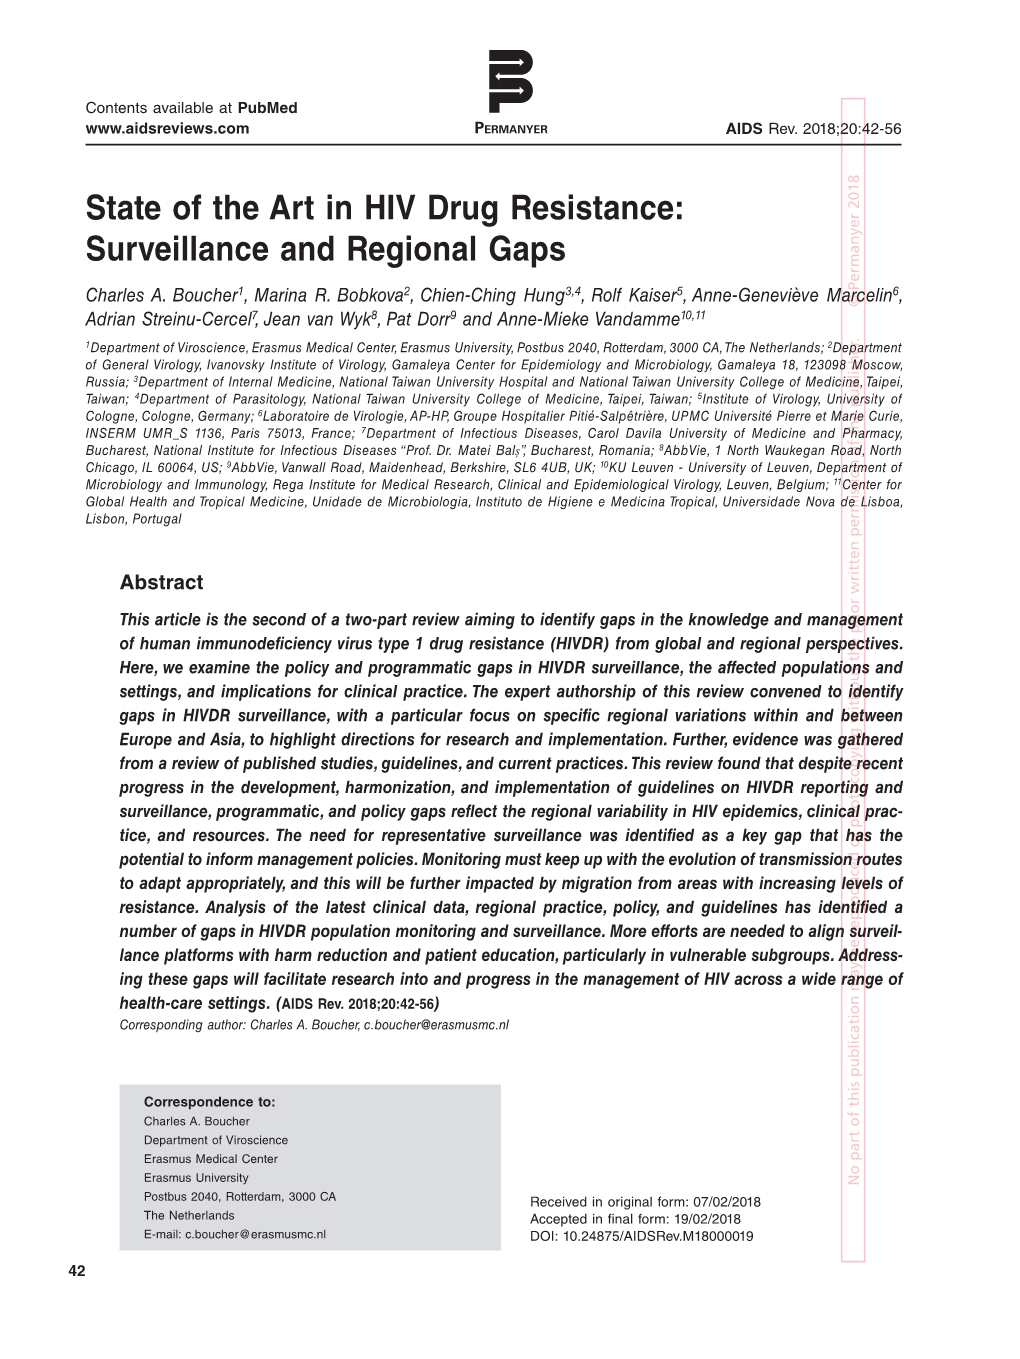 State of the Art in HIV Drug Resistance: Surveillance and Regional Gaps Charles A